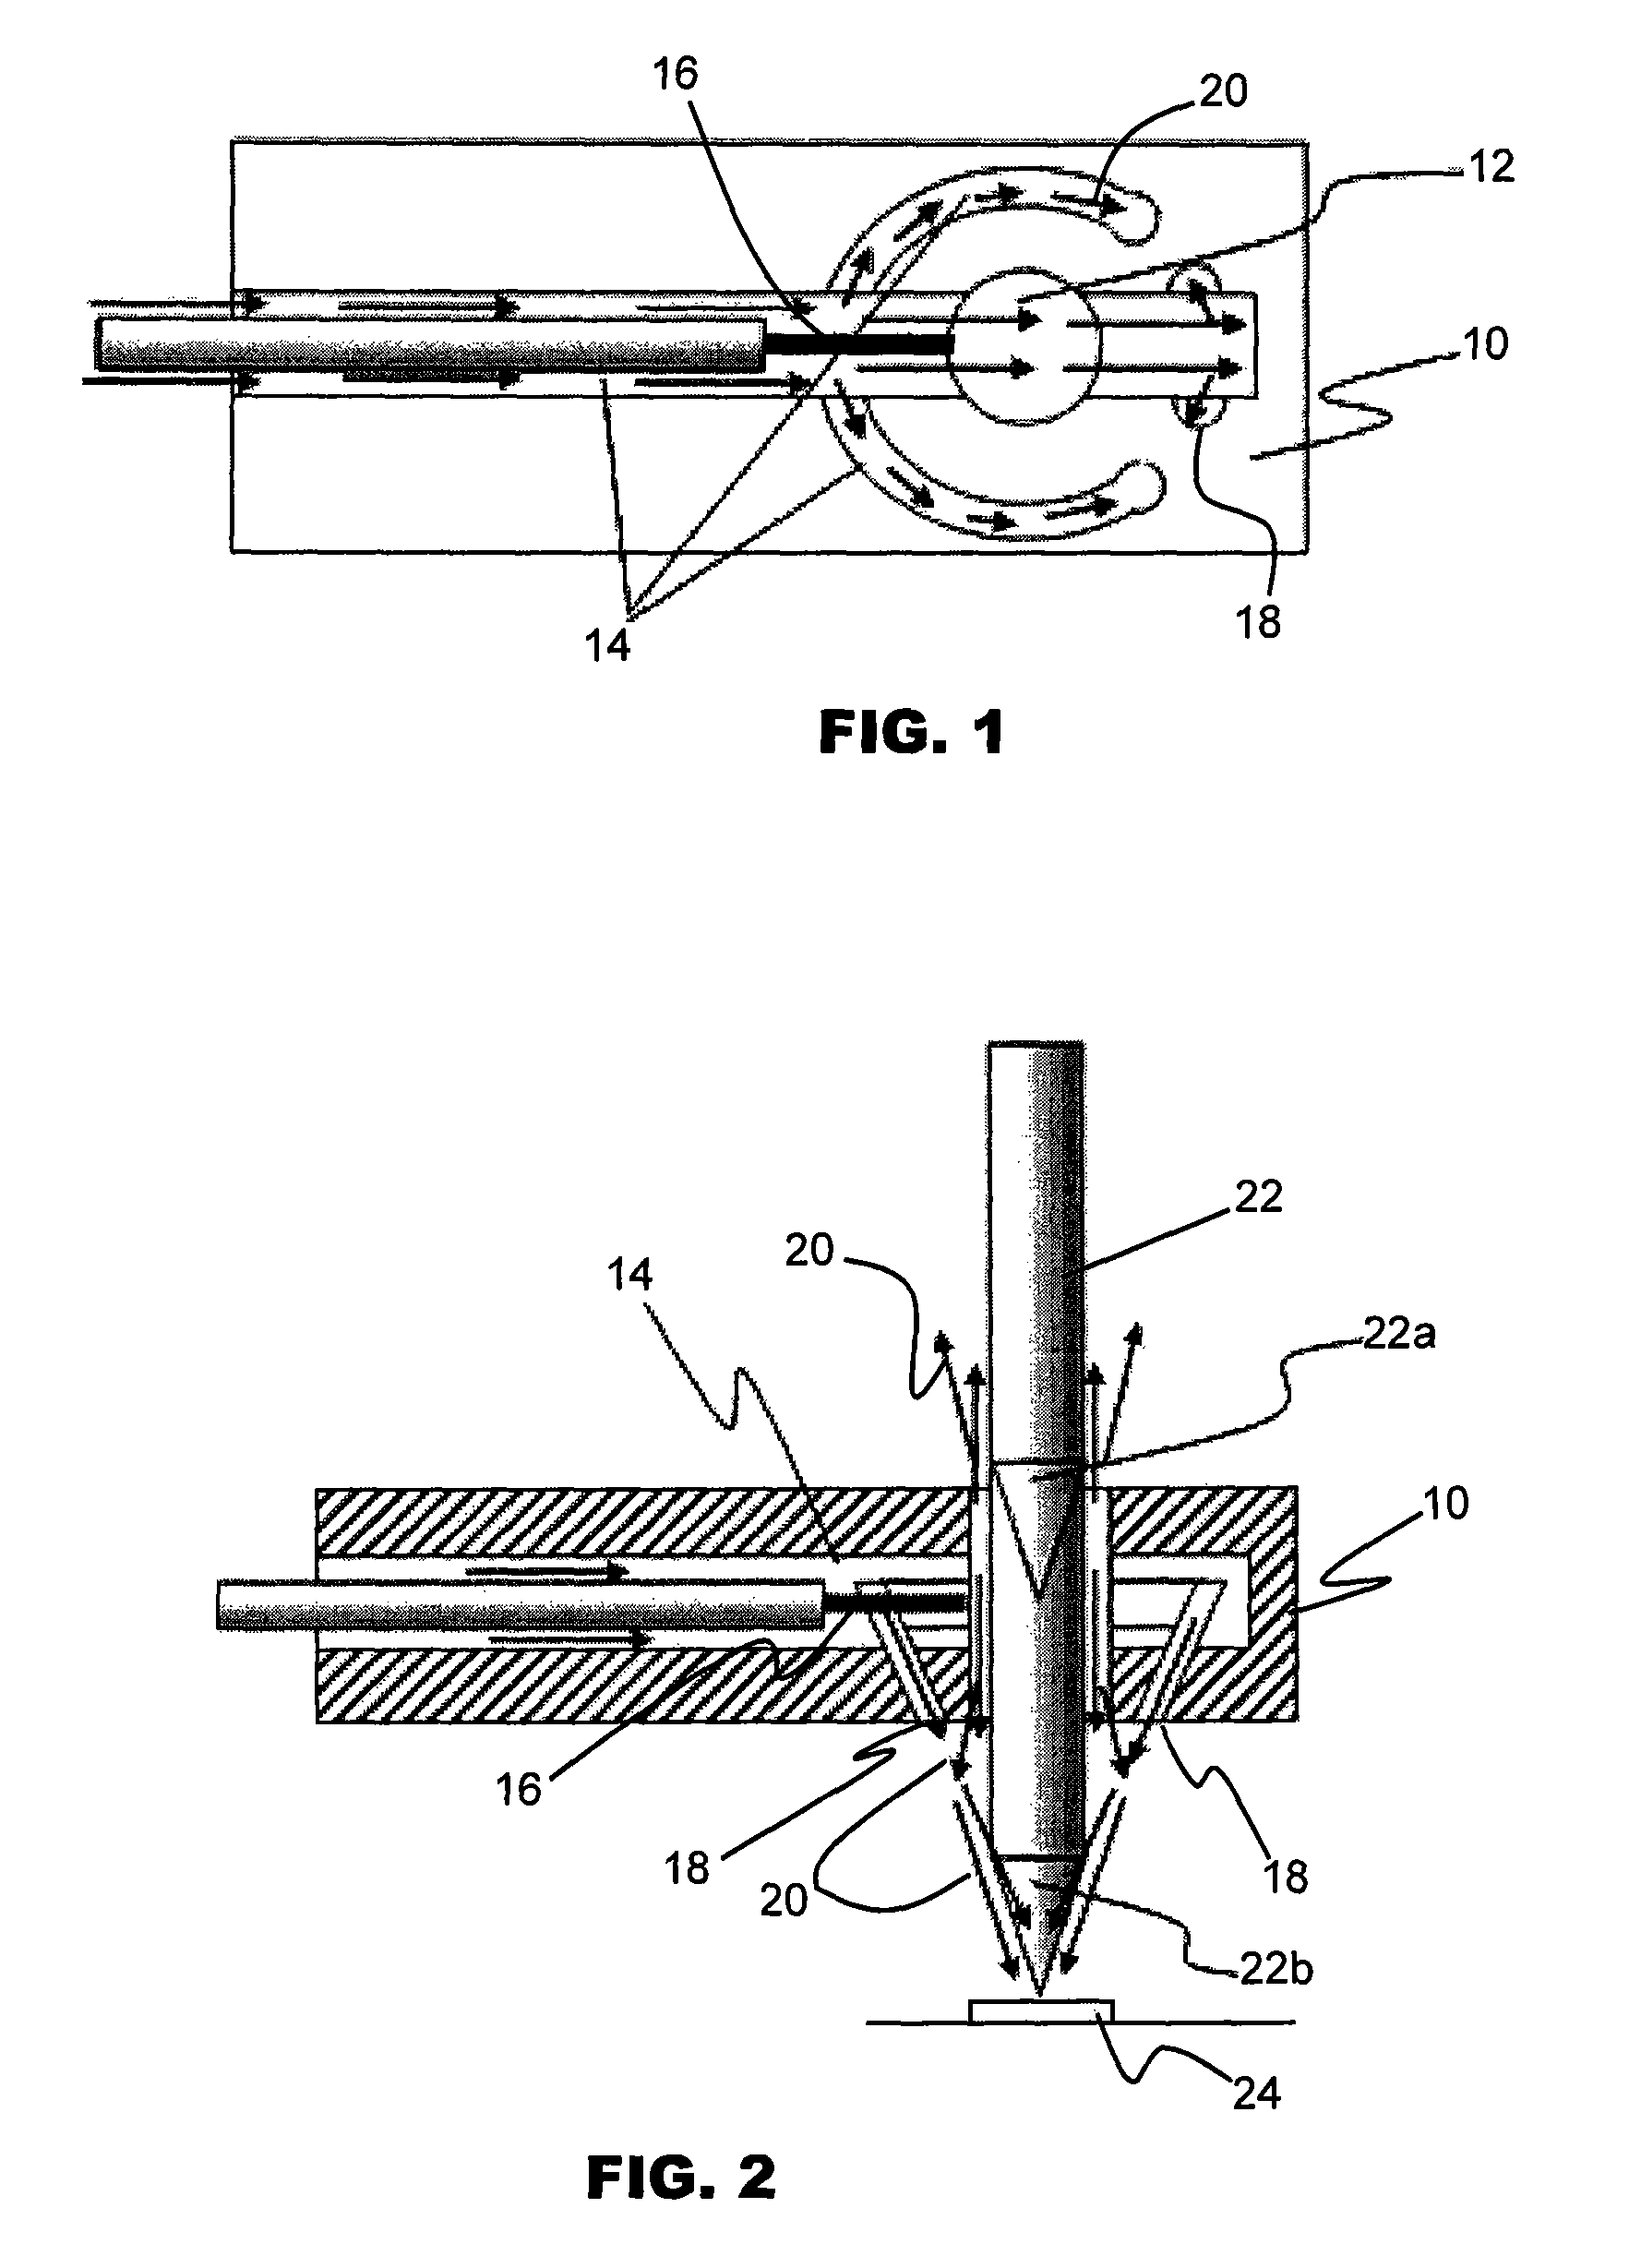 Apparatus for increasing coverage of shielding gas during wire bonding